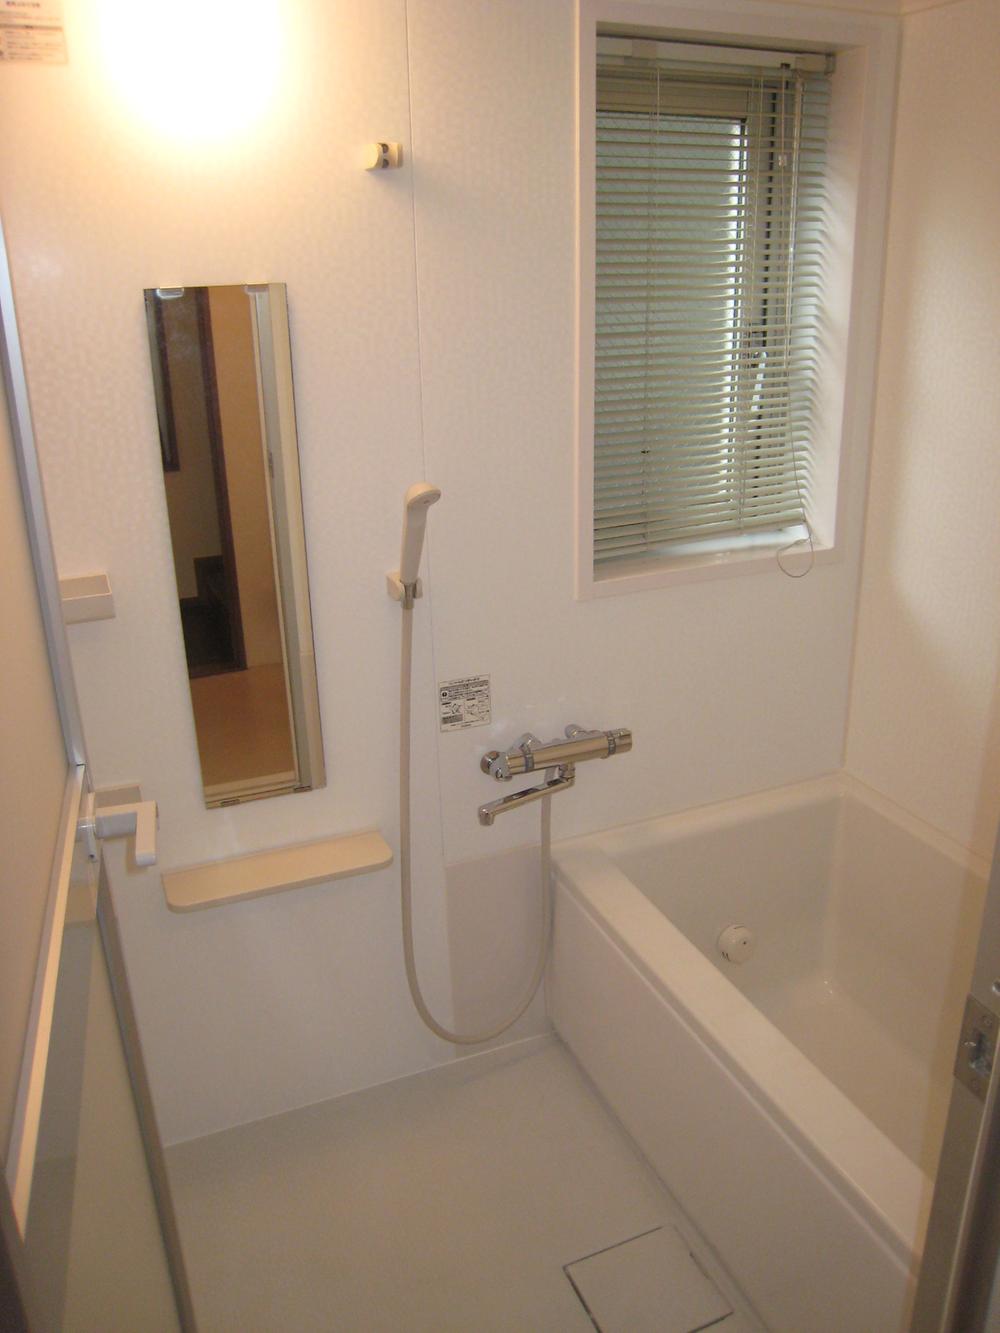 Bathroom. Bathroom with a clean sense of the white and the keynote is, Natural ventilation possible with windows.